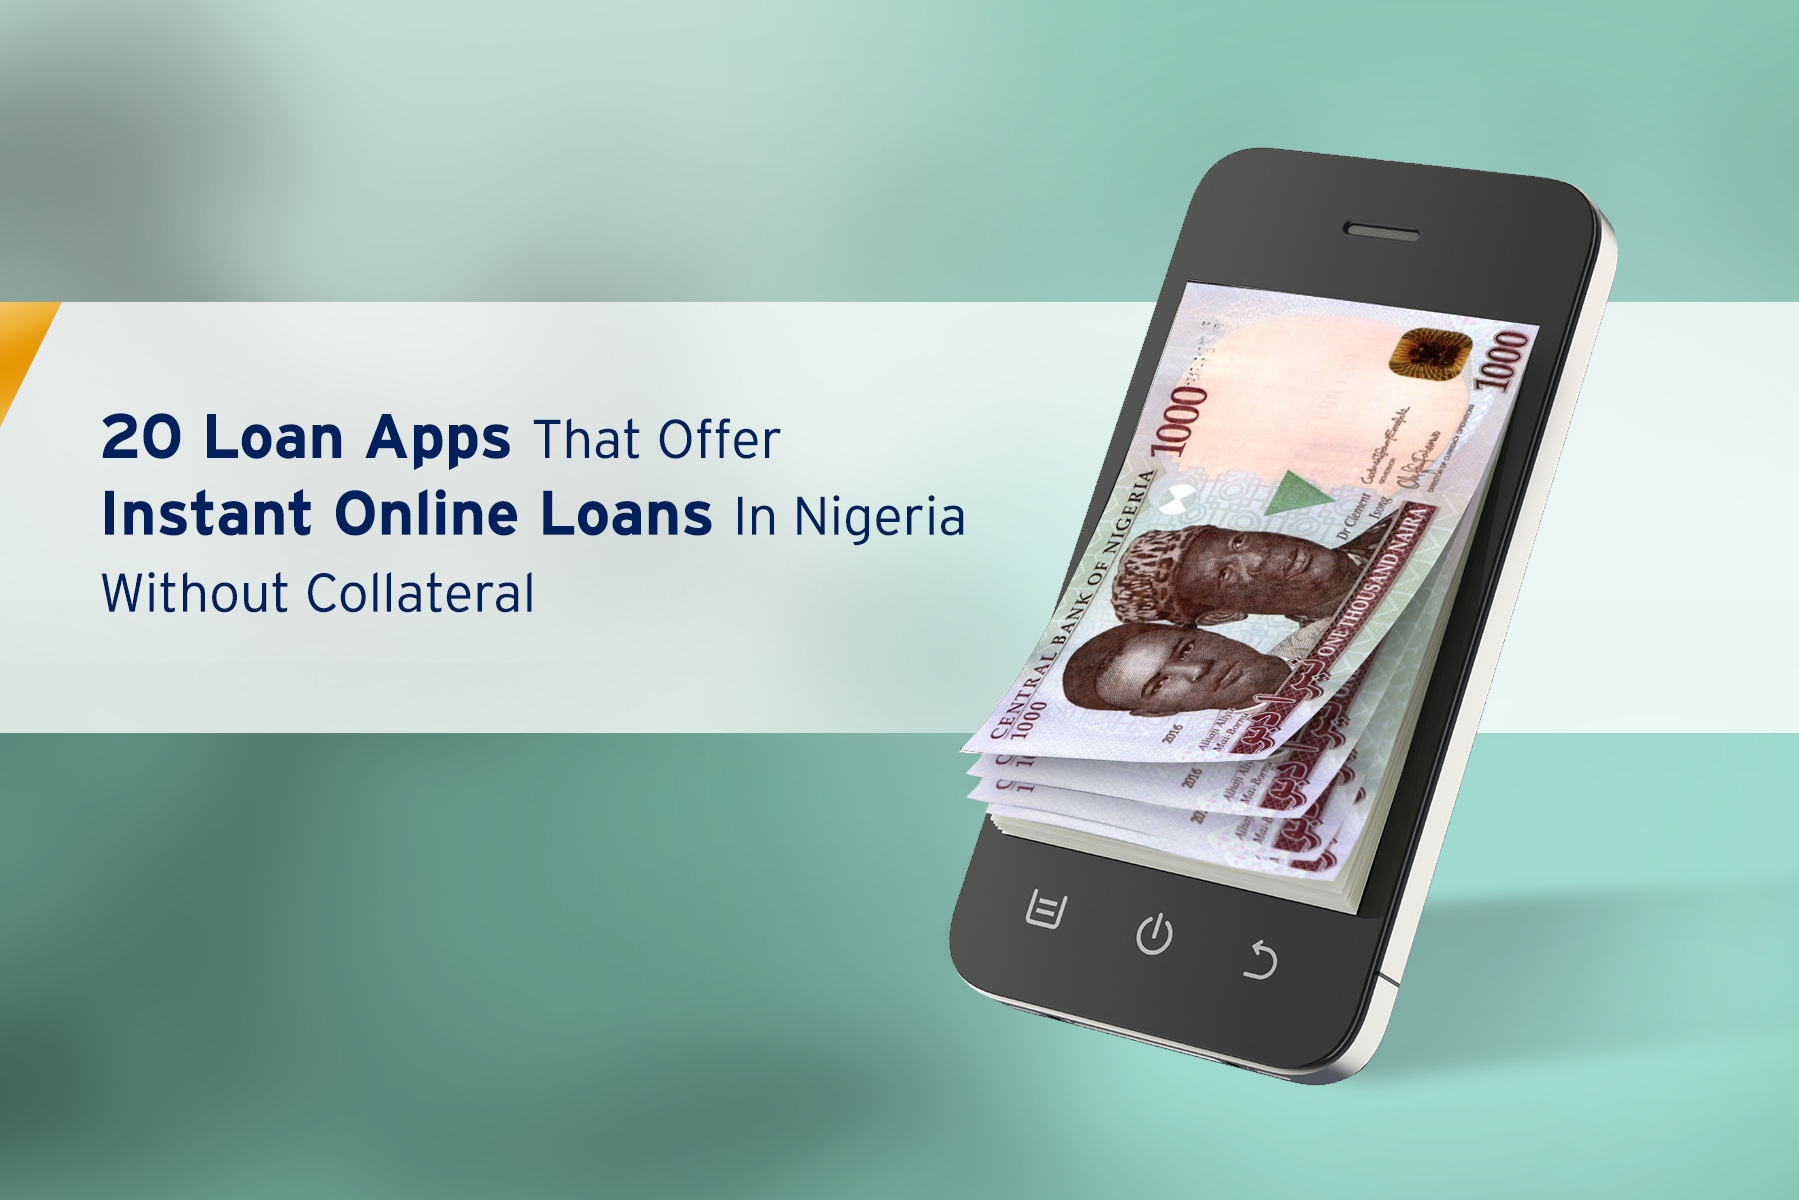 20 Loan Apps that Offer Instant Online Loans in Nigeria Without Collateral